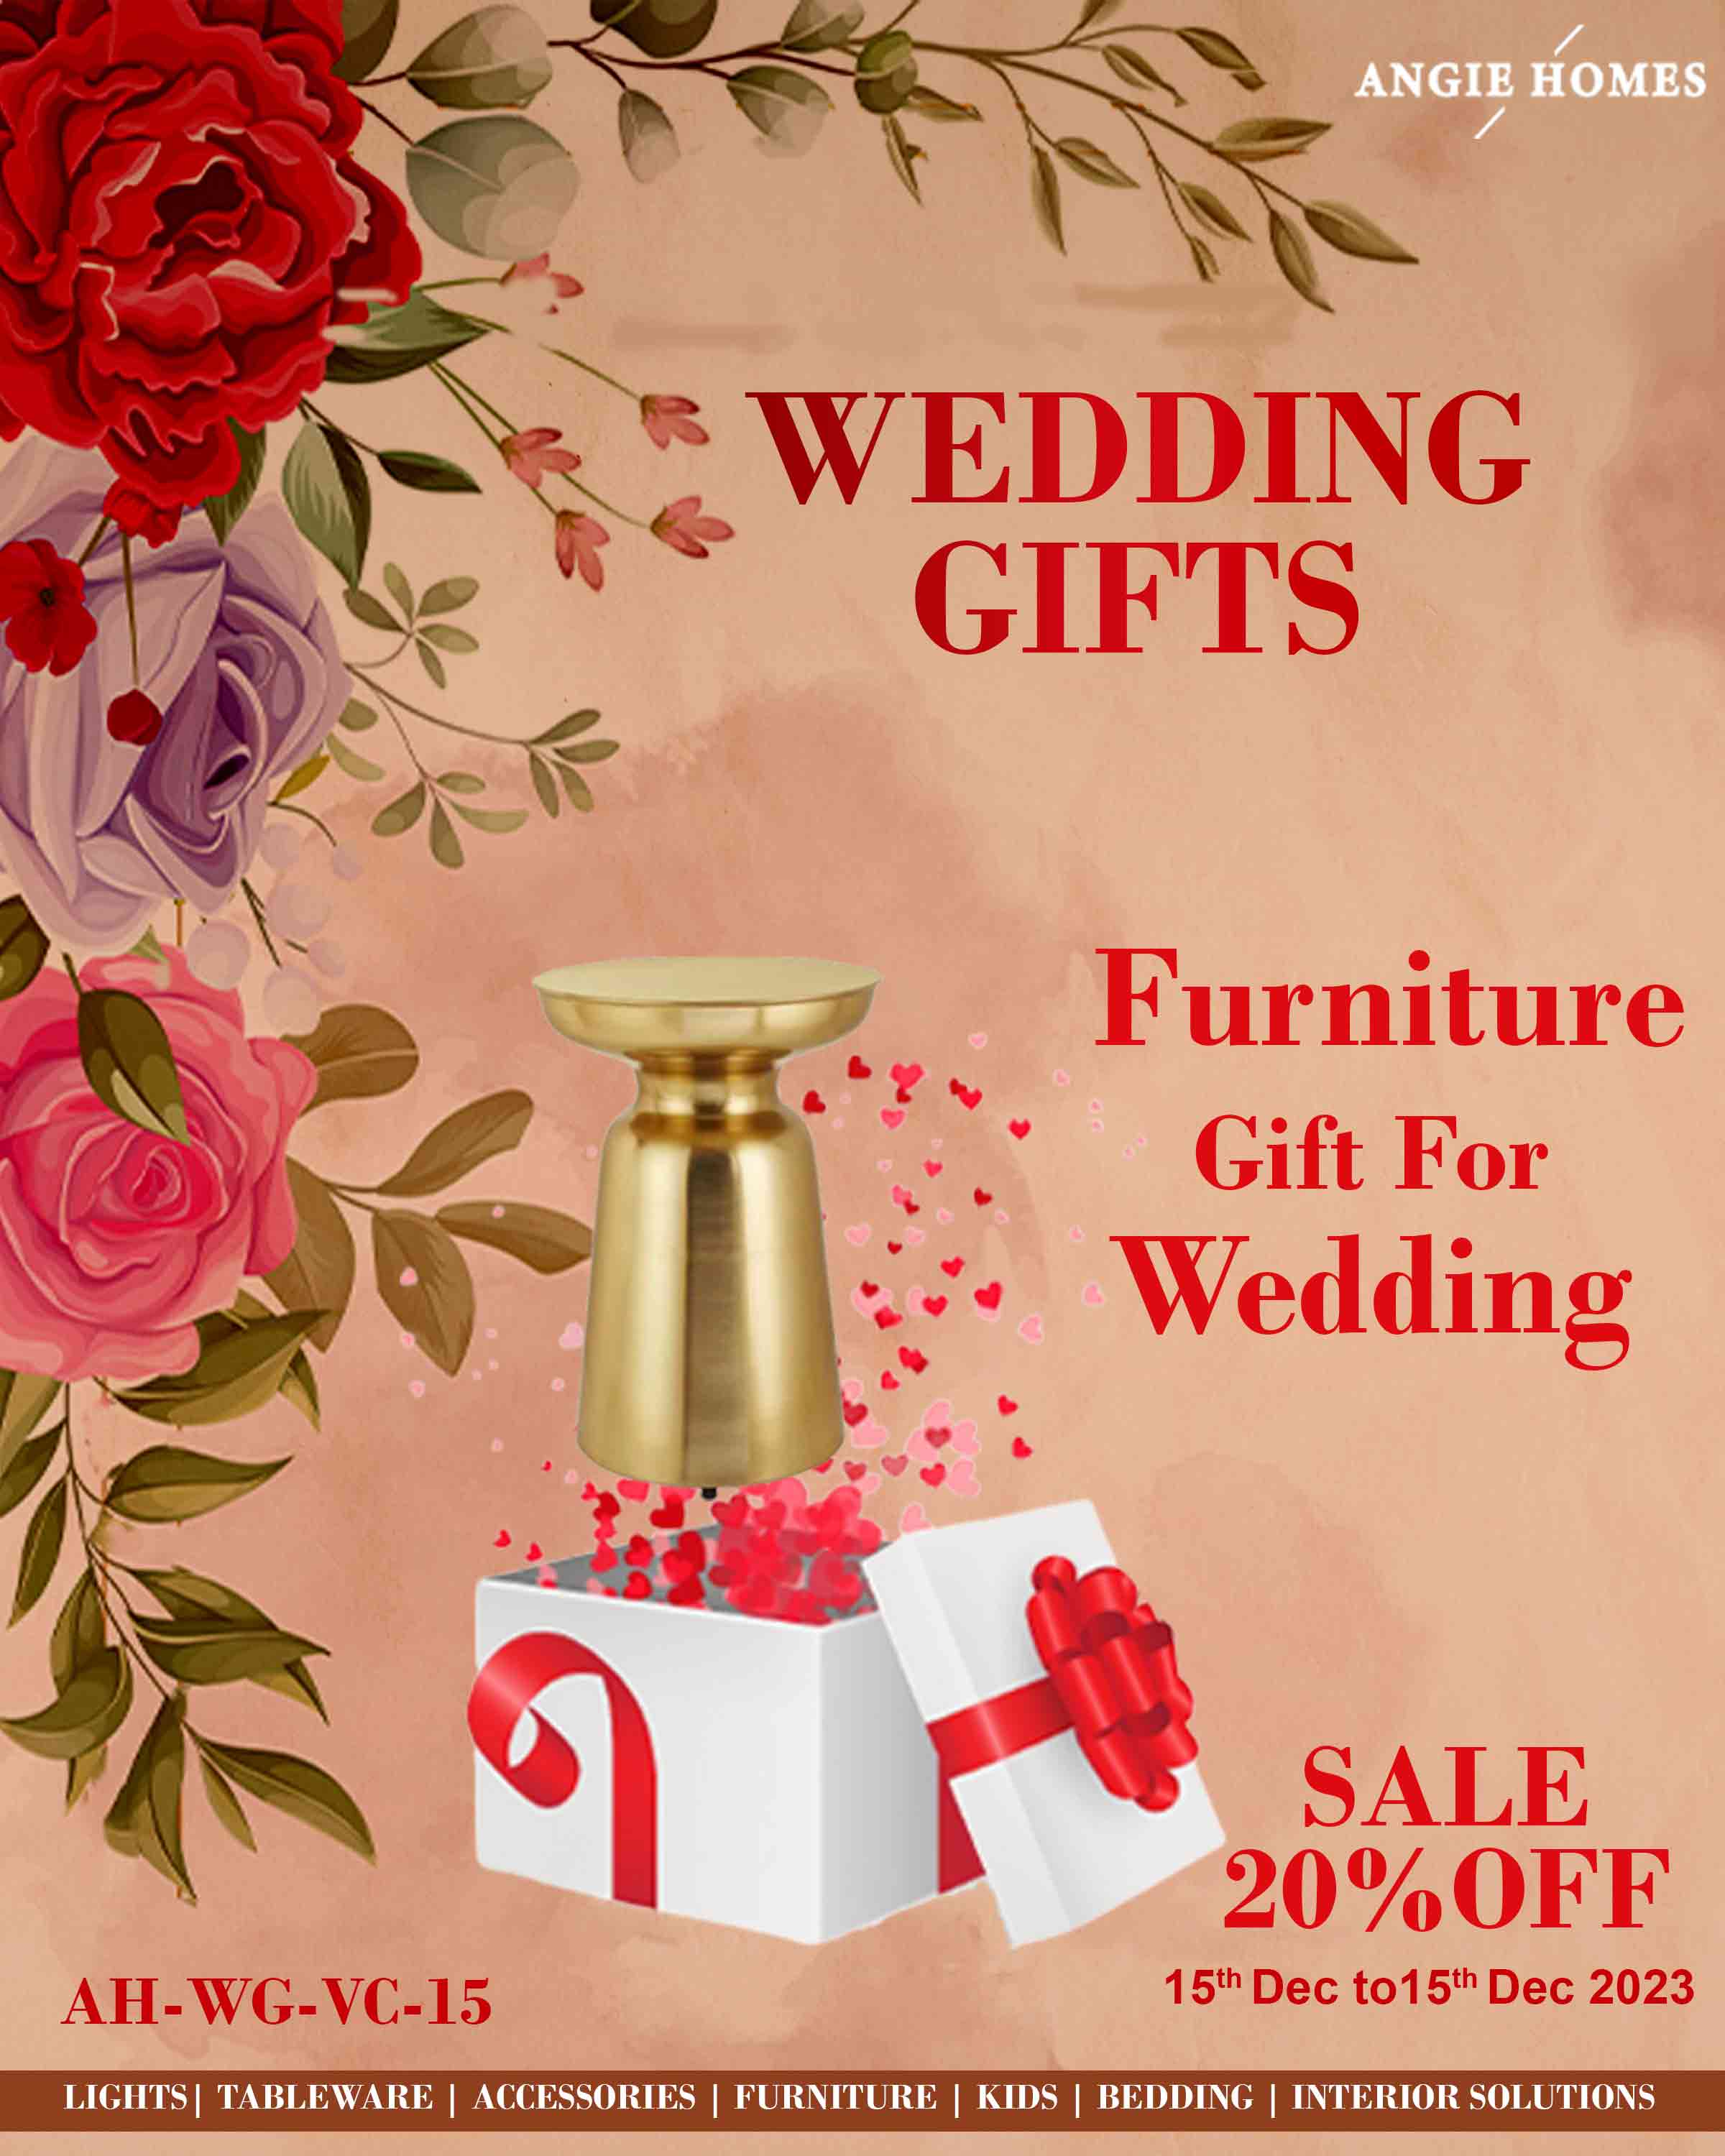 FURNITURE FOR WEDDING GIFTS | MARRIAGE GIFT VOUCHER | PREMIUM GIFTTING ANGIE HOMES